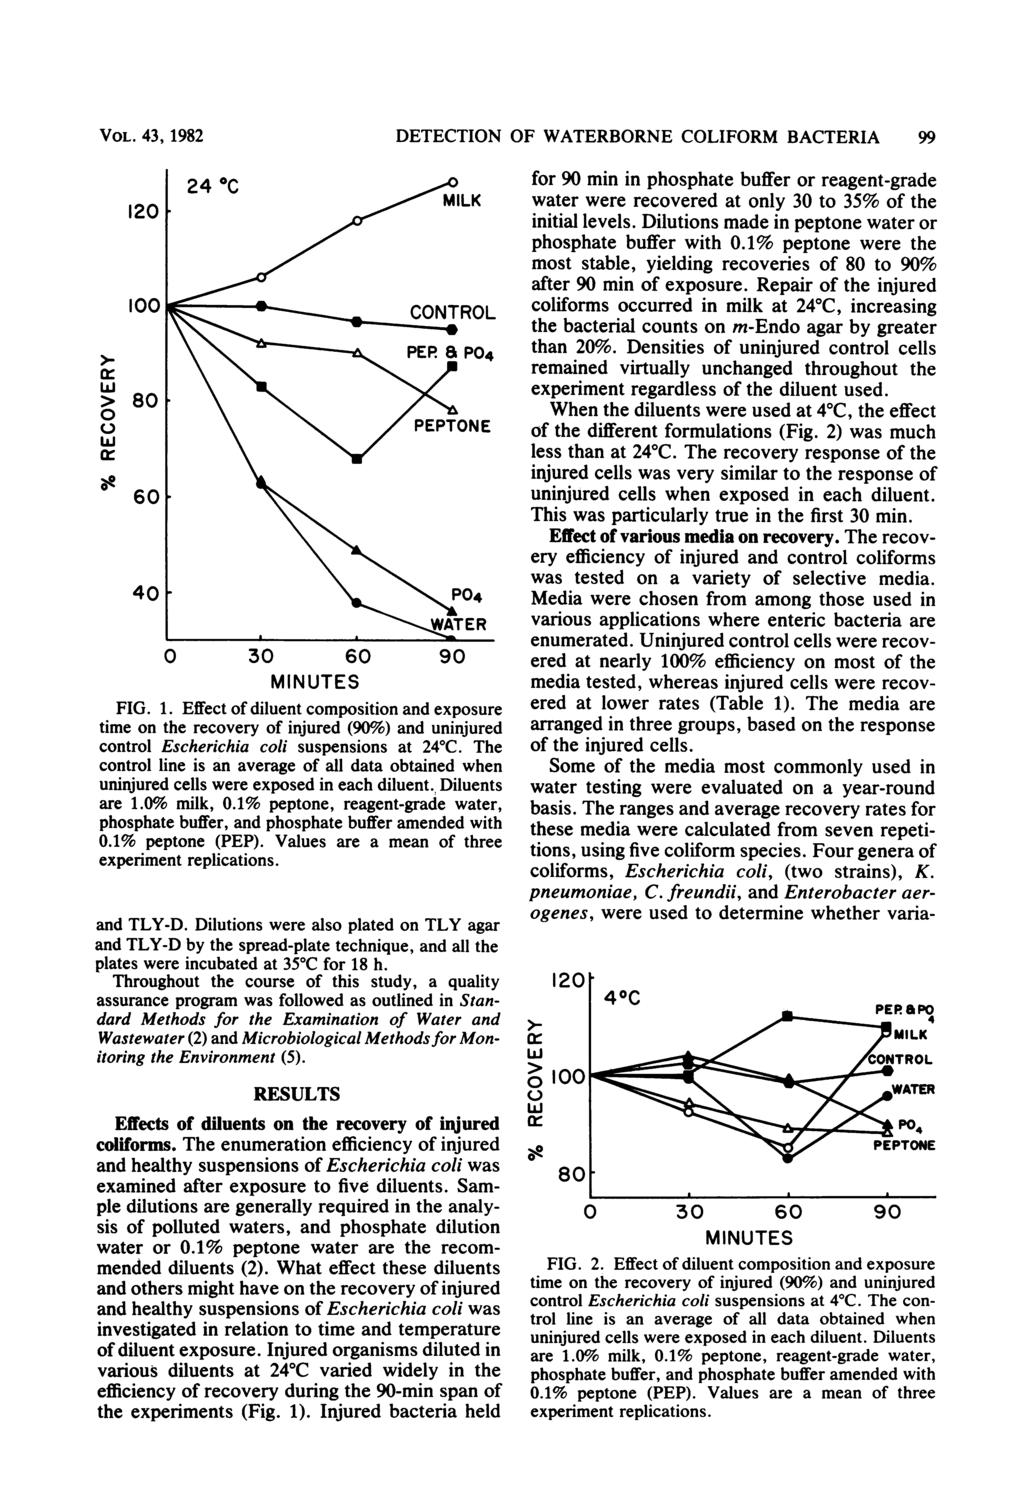 VOL. 43, 1982 120 100 CONRO >_ DETECTION OF WATERBORNE COLIFORM BACTERIA 99 I L. _. ~~~~~~~PER Si P04 > 80 0 L) PEPTONE 0-060- 40 P0 4o \4WAT~~~~ER 0 30 60 90 MINUTES FIG. 1. Effect of diluent composition and exposure time on the recovery of injured (90%) and uninjured control Escherichia coli suspensions at 24 C.